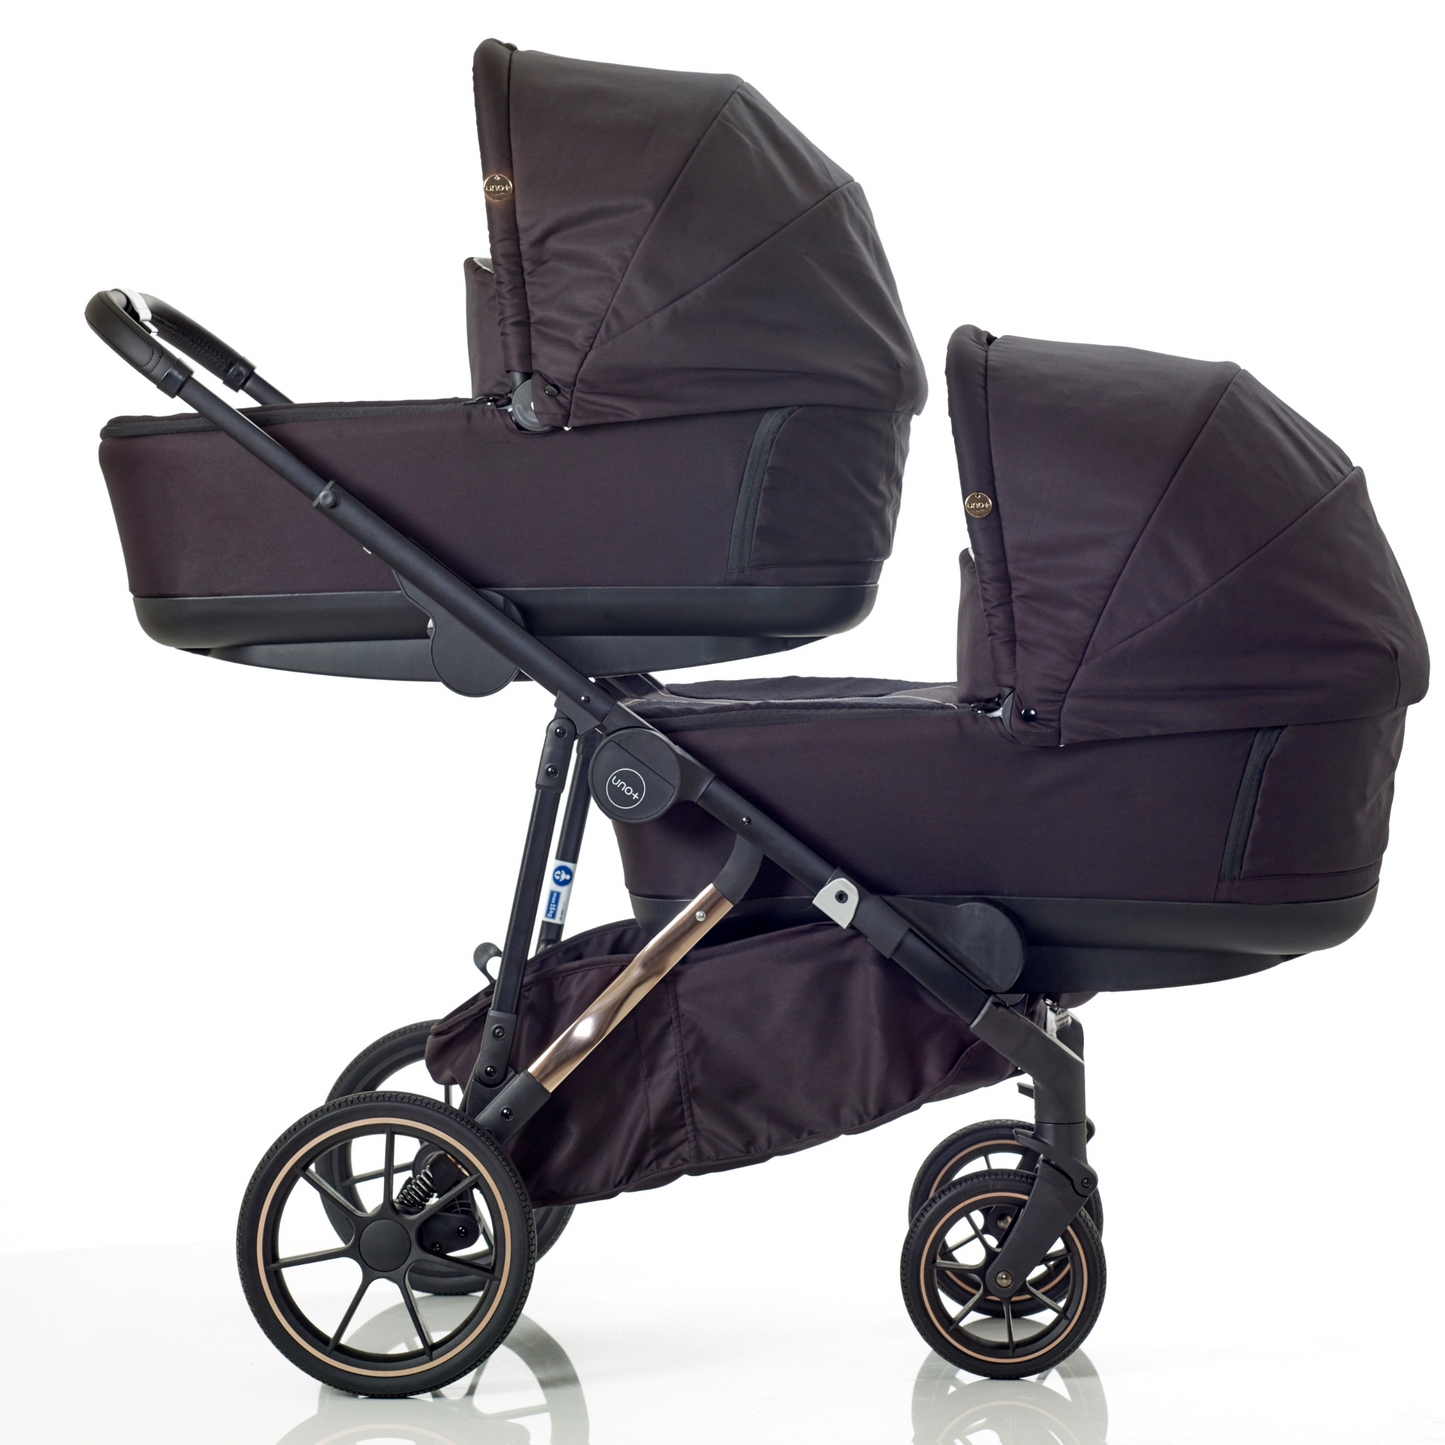 Mee-go UNO+ Travel System